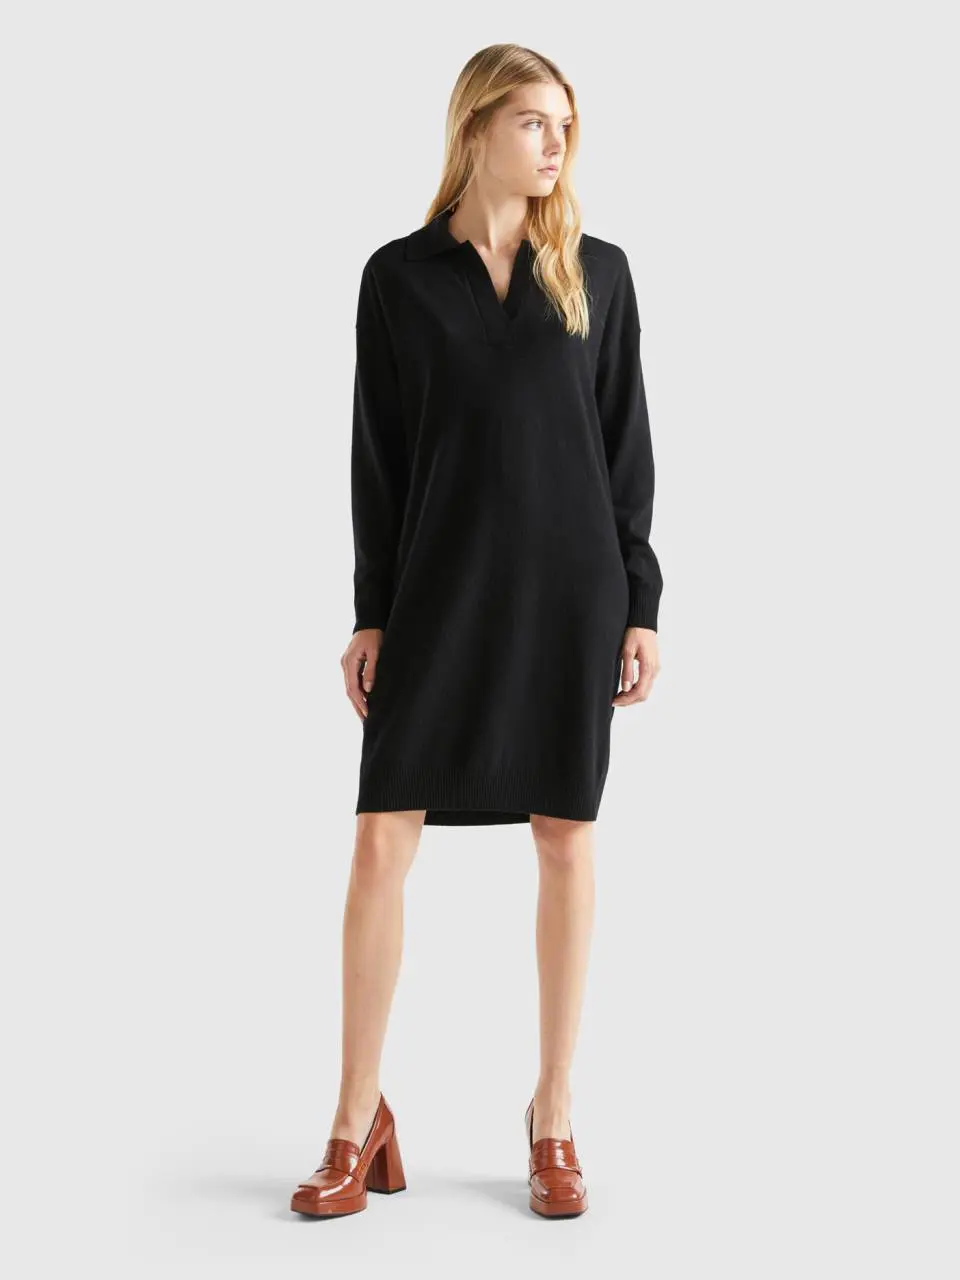 Benetton knit dress with collar. 1